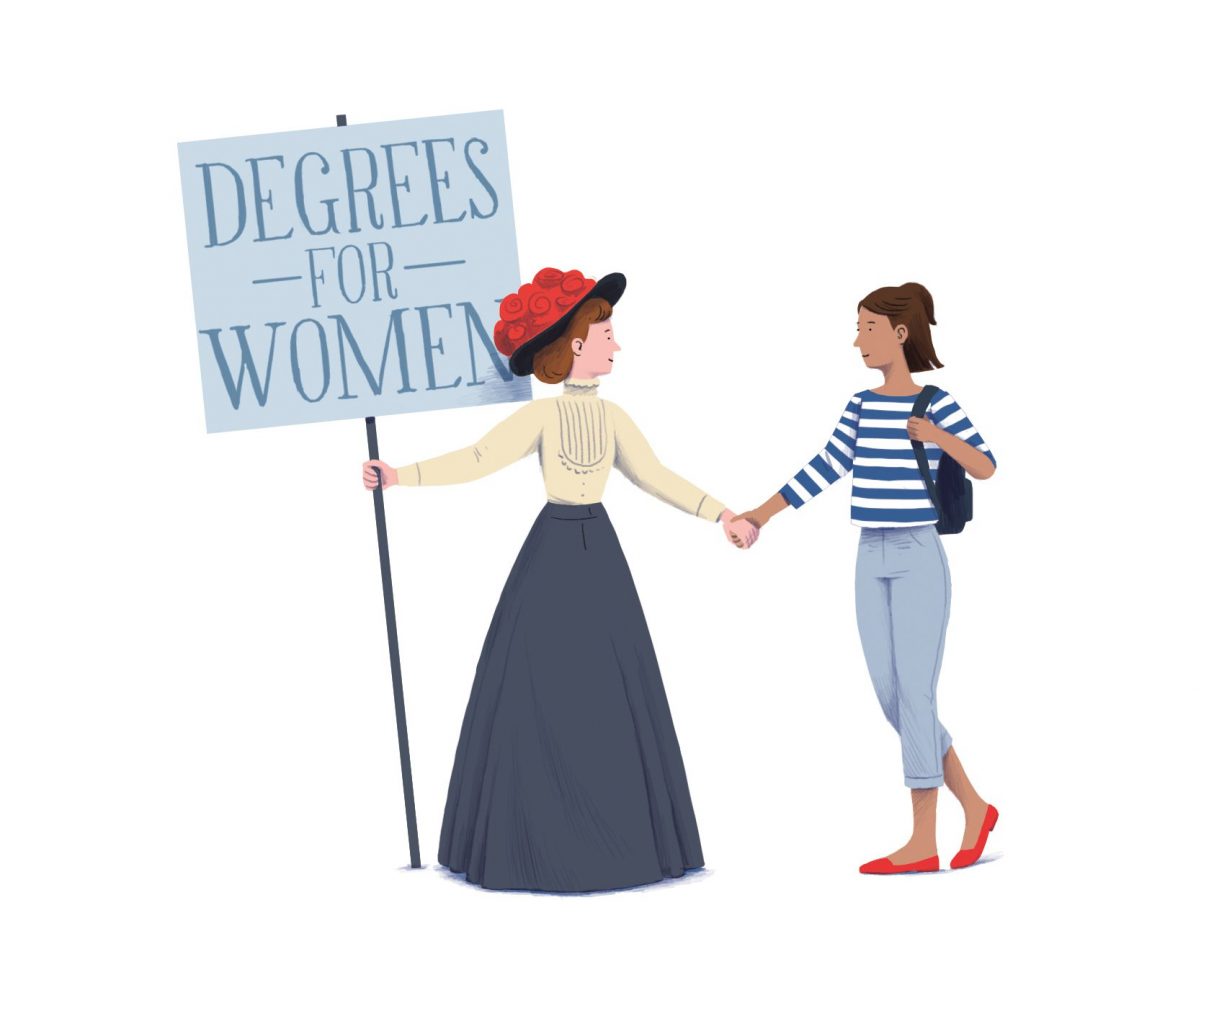 Women at Cambridge then and now